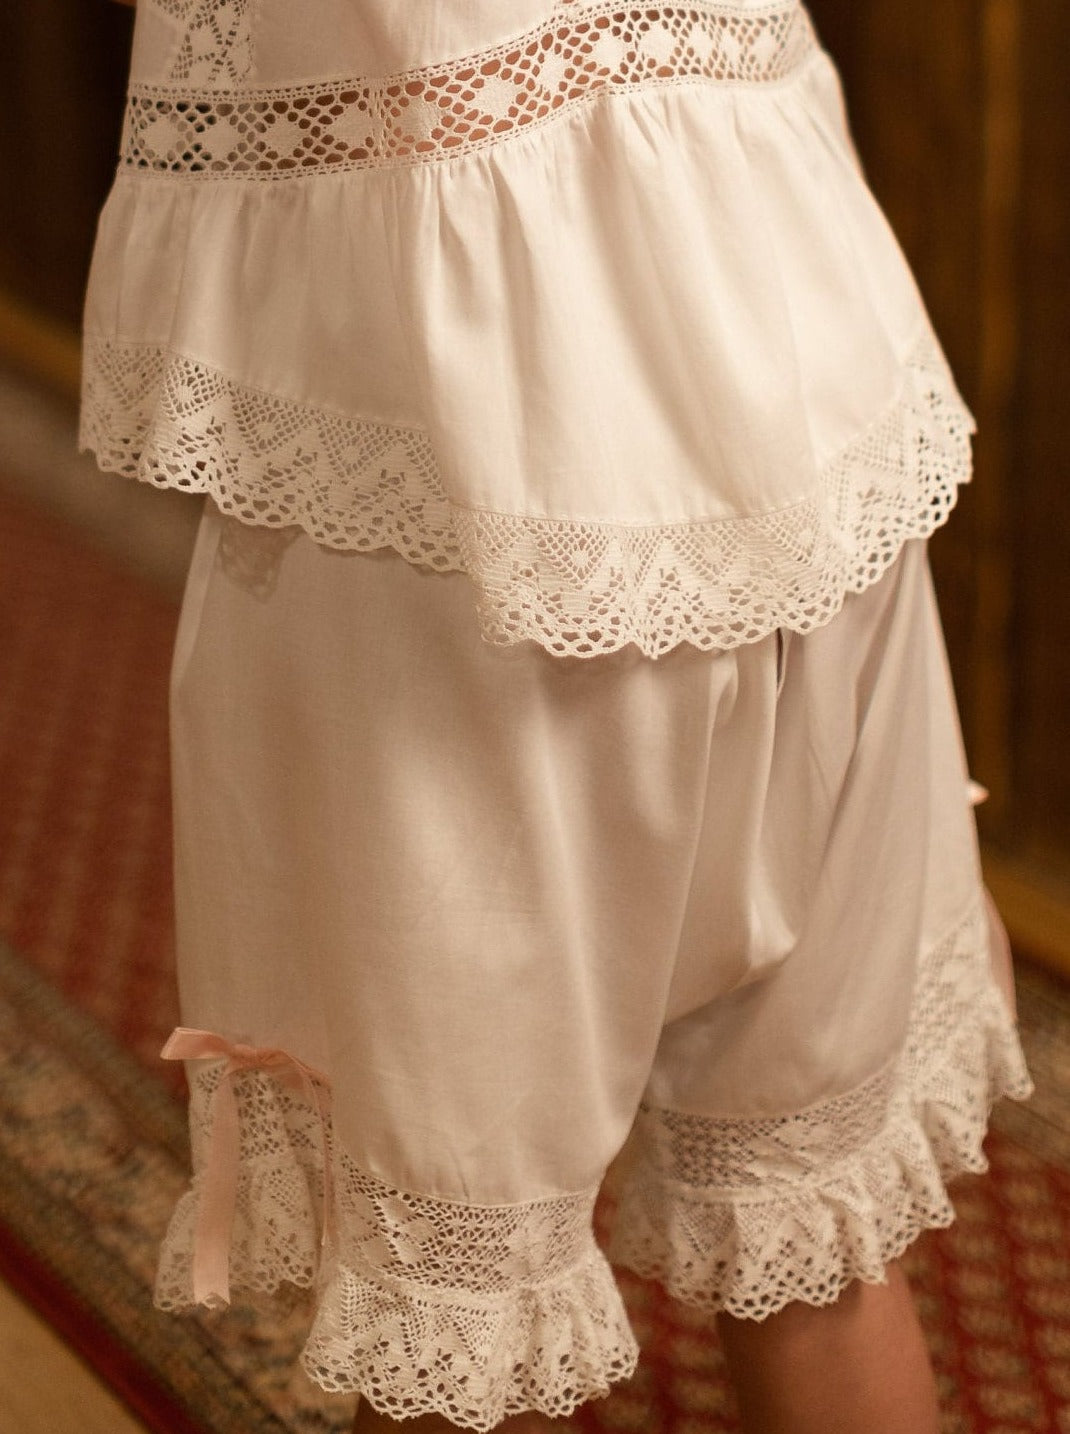 Mademoiselle French Bloomers in White Cotton